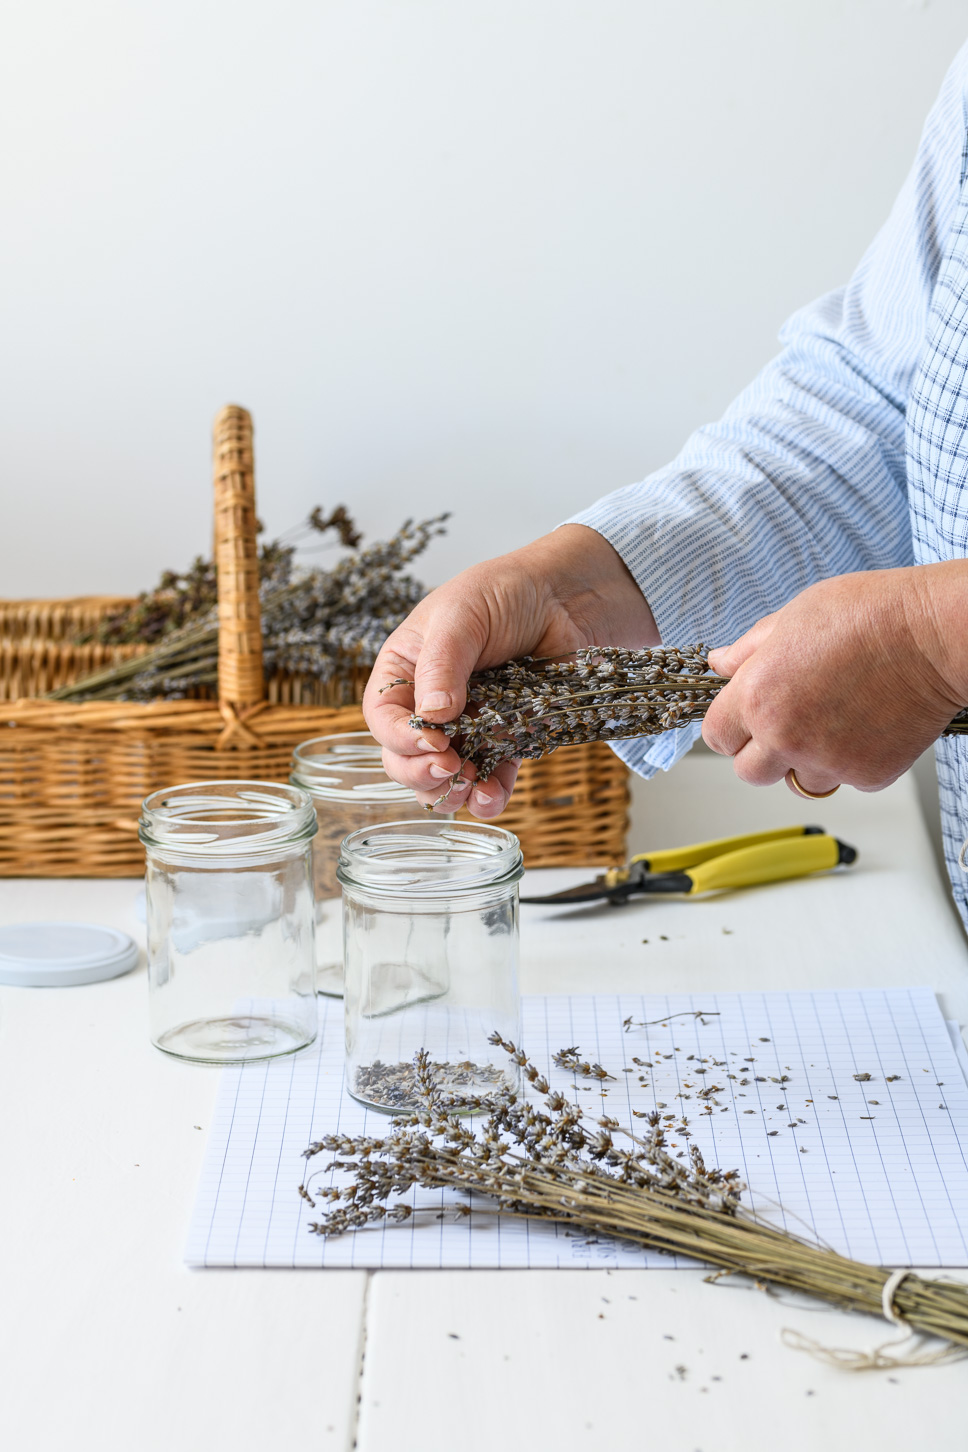 Natural skincare company owner Silvana de Soissons compliing dried herbs for storing